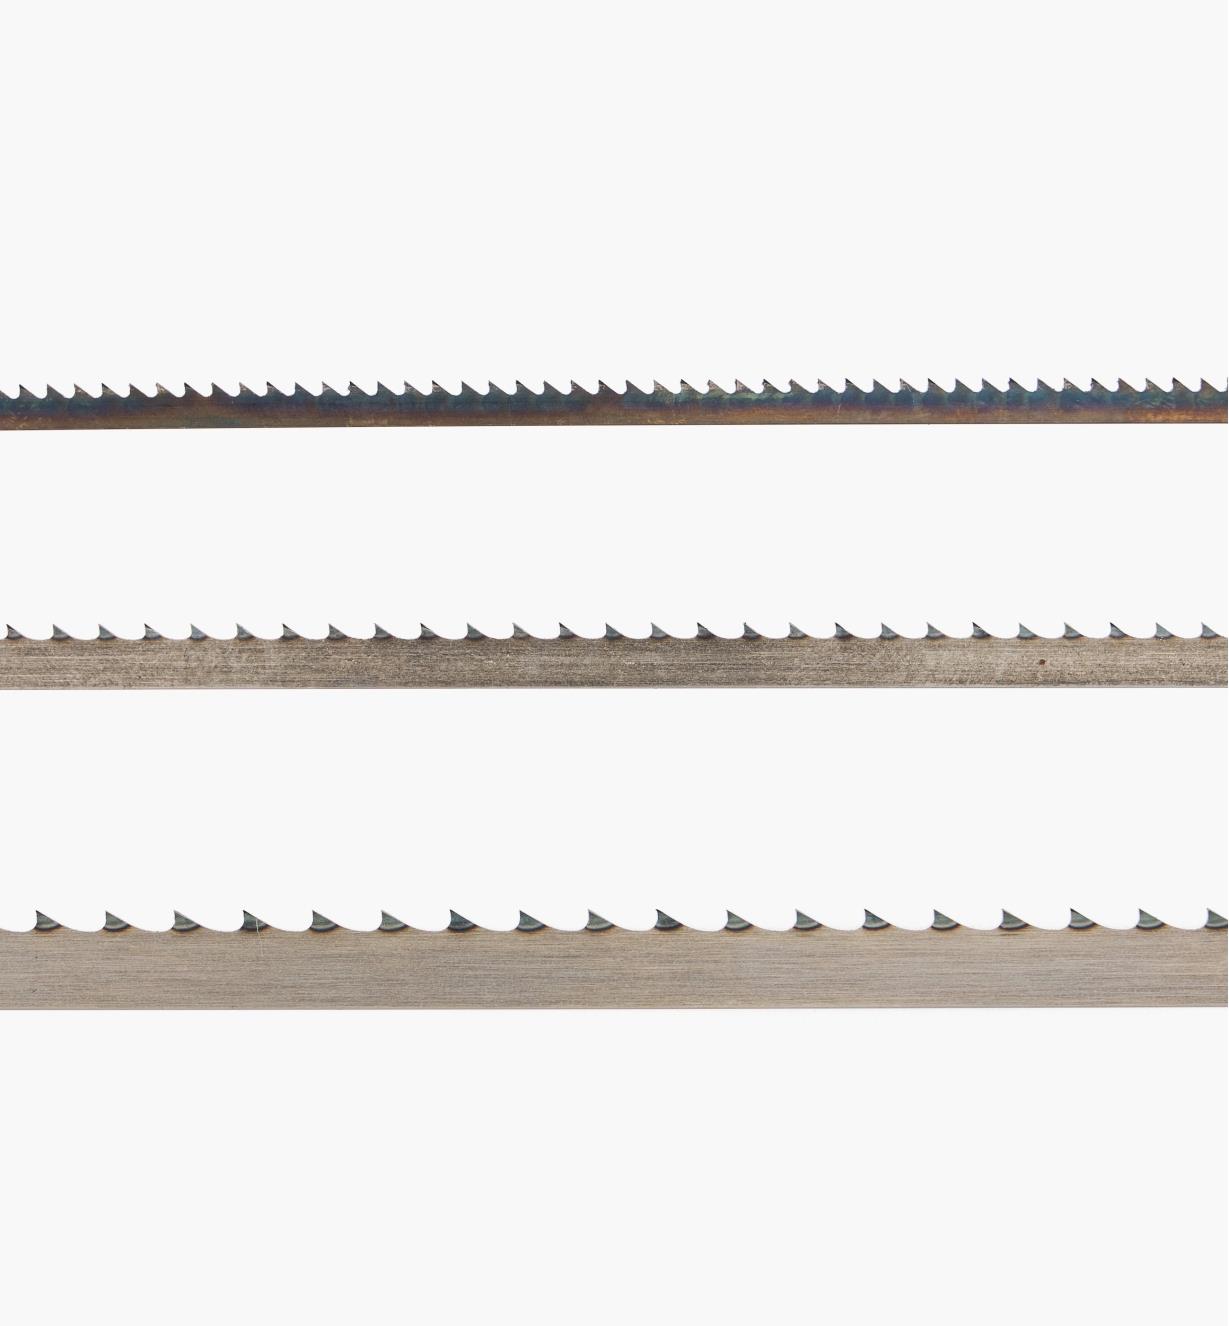 A close-up view of the three bandsaw blades in the set, showing the different tooth patterns